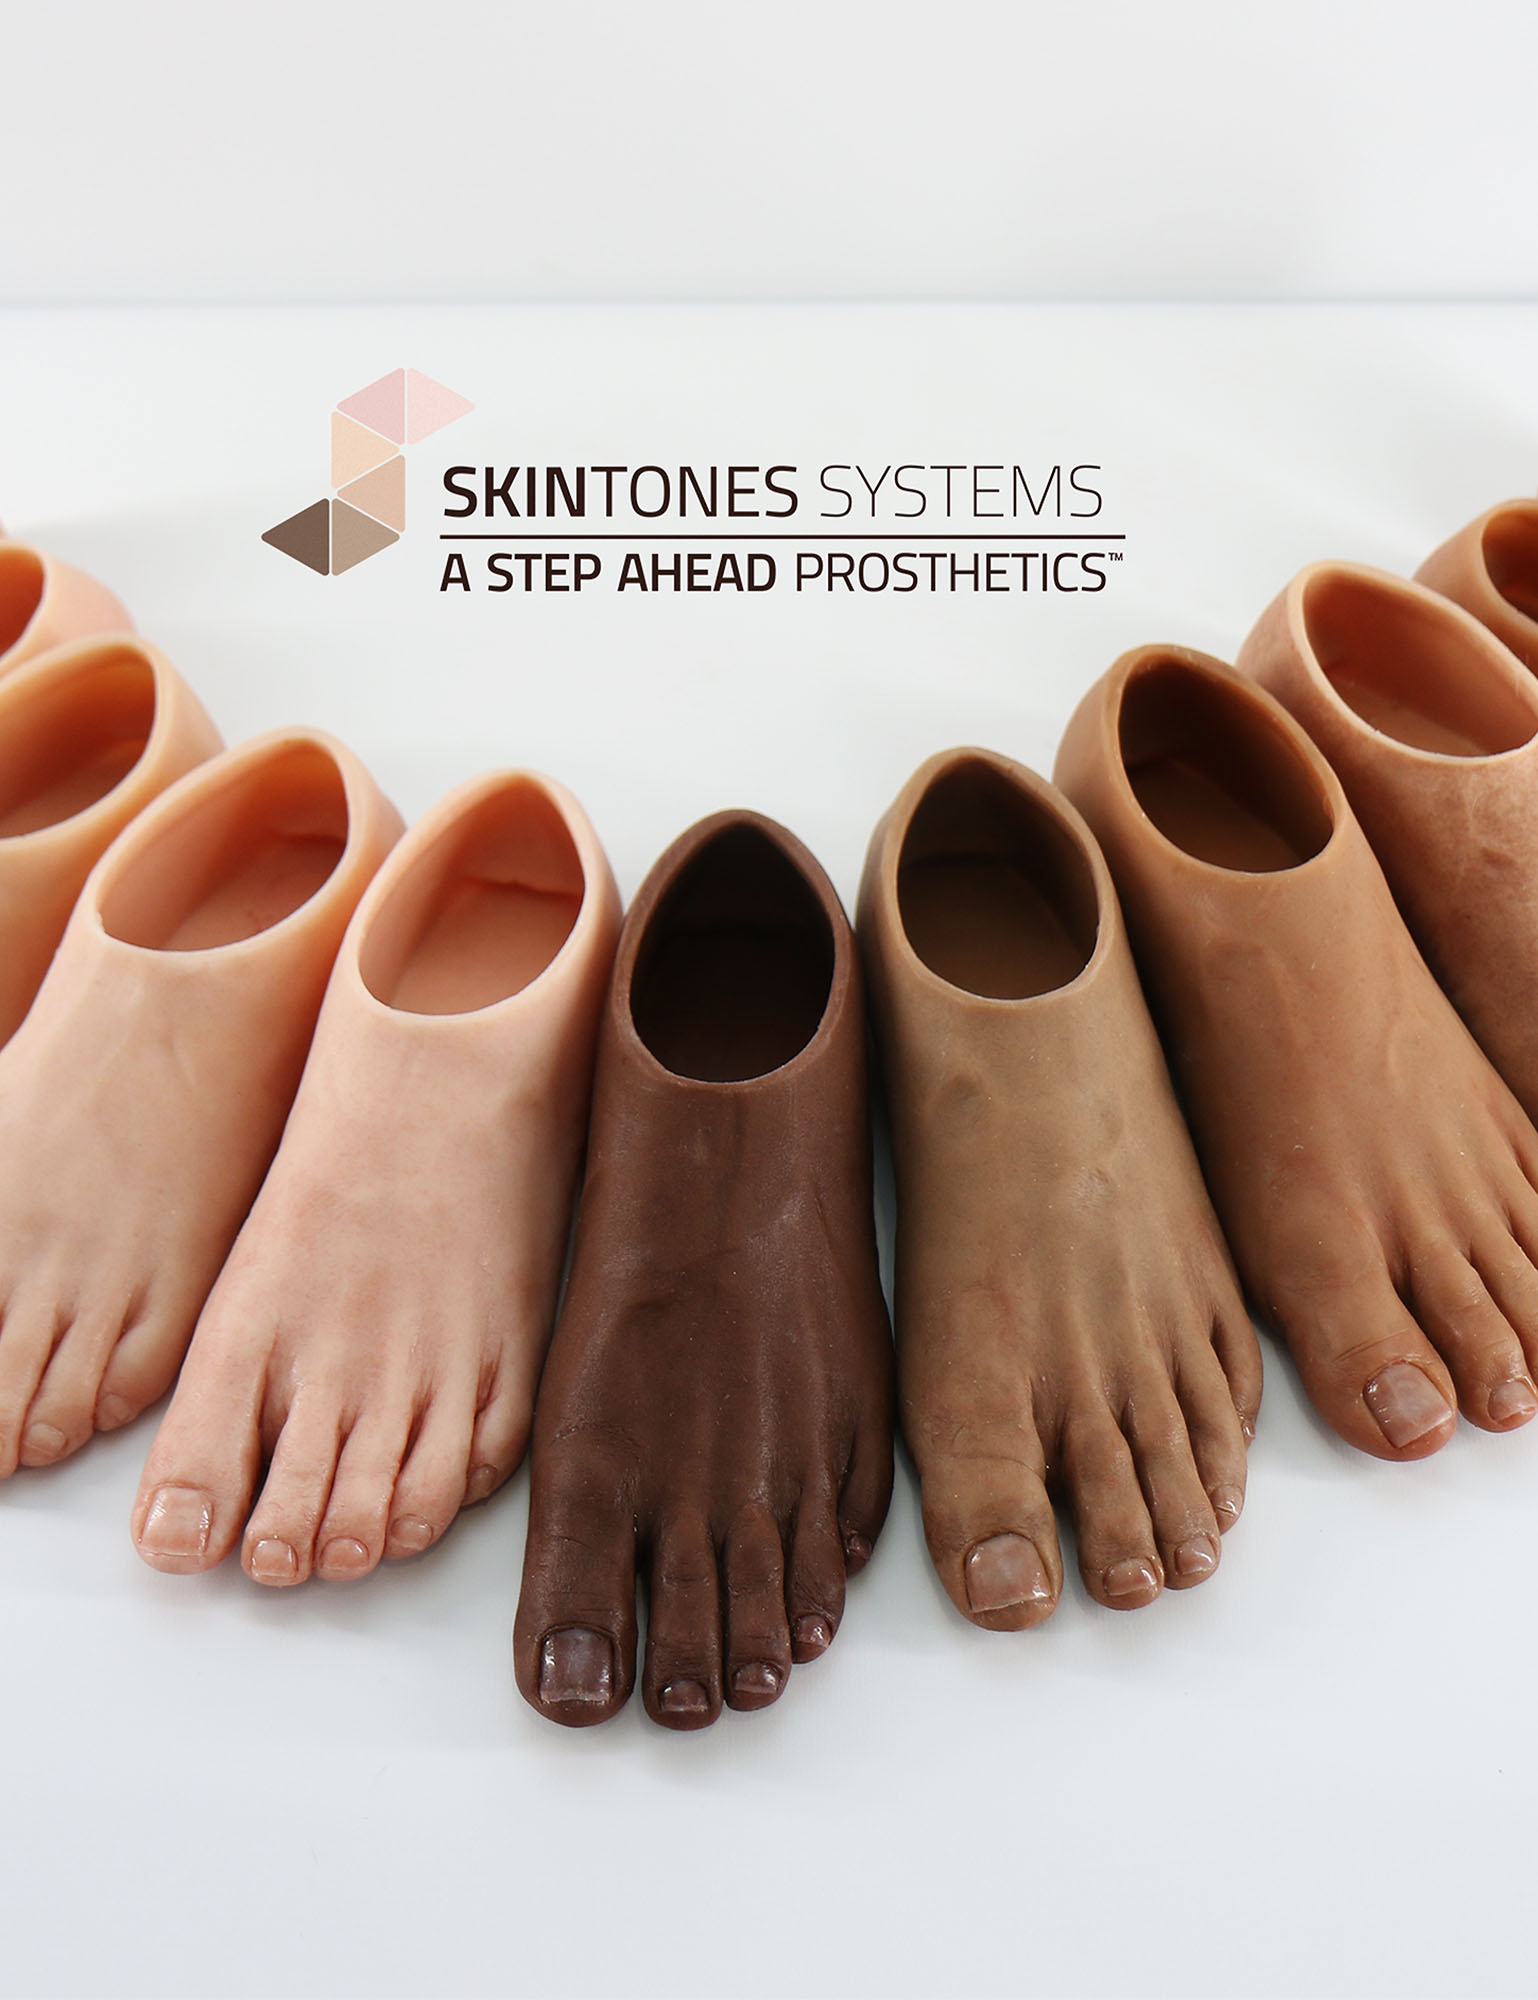 Get Skintones – A Step Ahead Prosthetics Anatomical Solutions